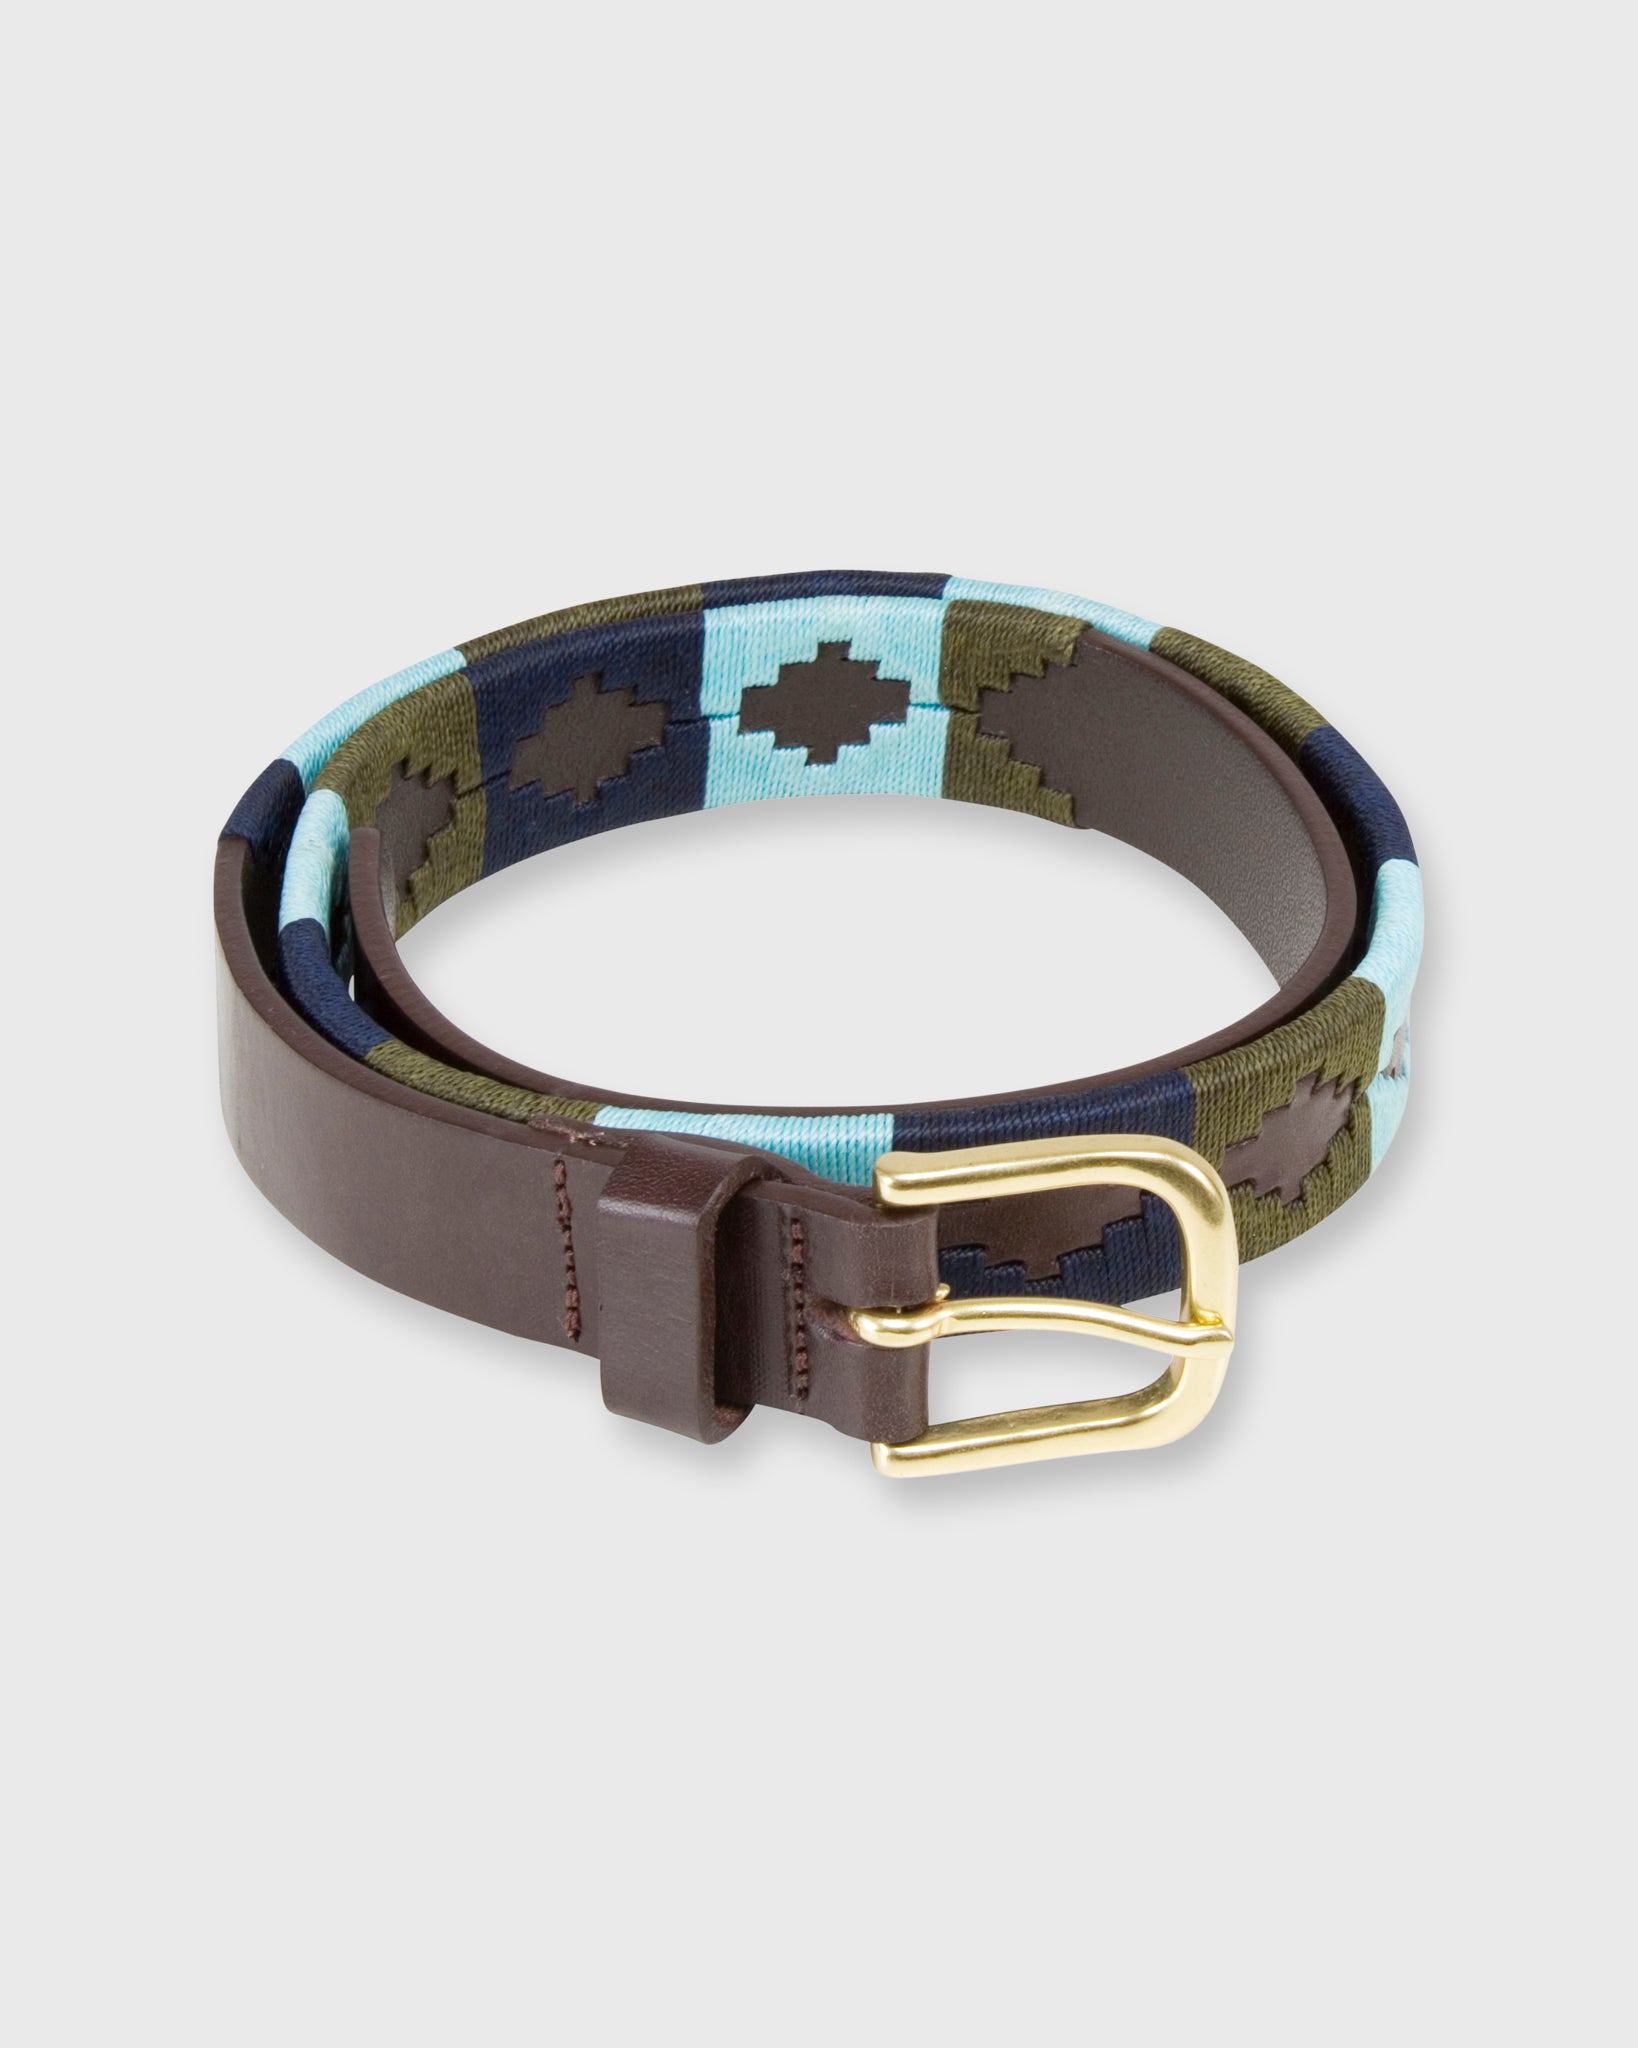 1 1/8" Polo Belt in Olive/Sky/Navy Chocolate Leather